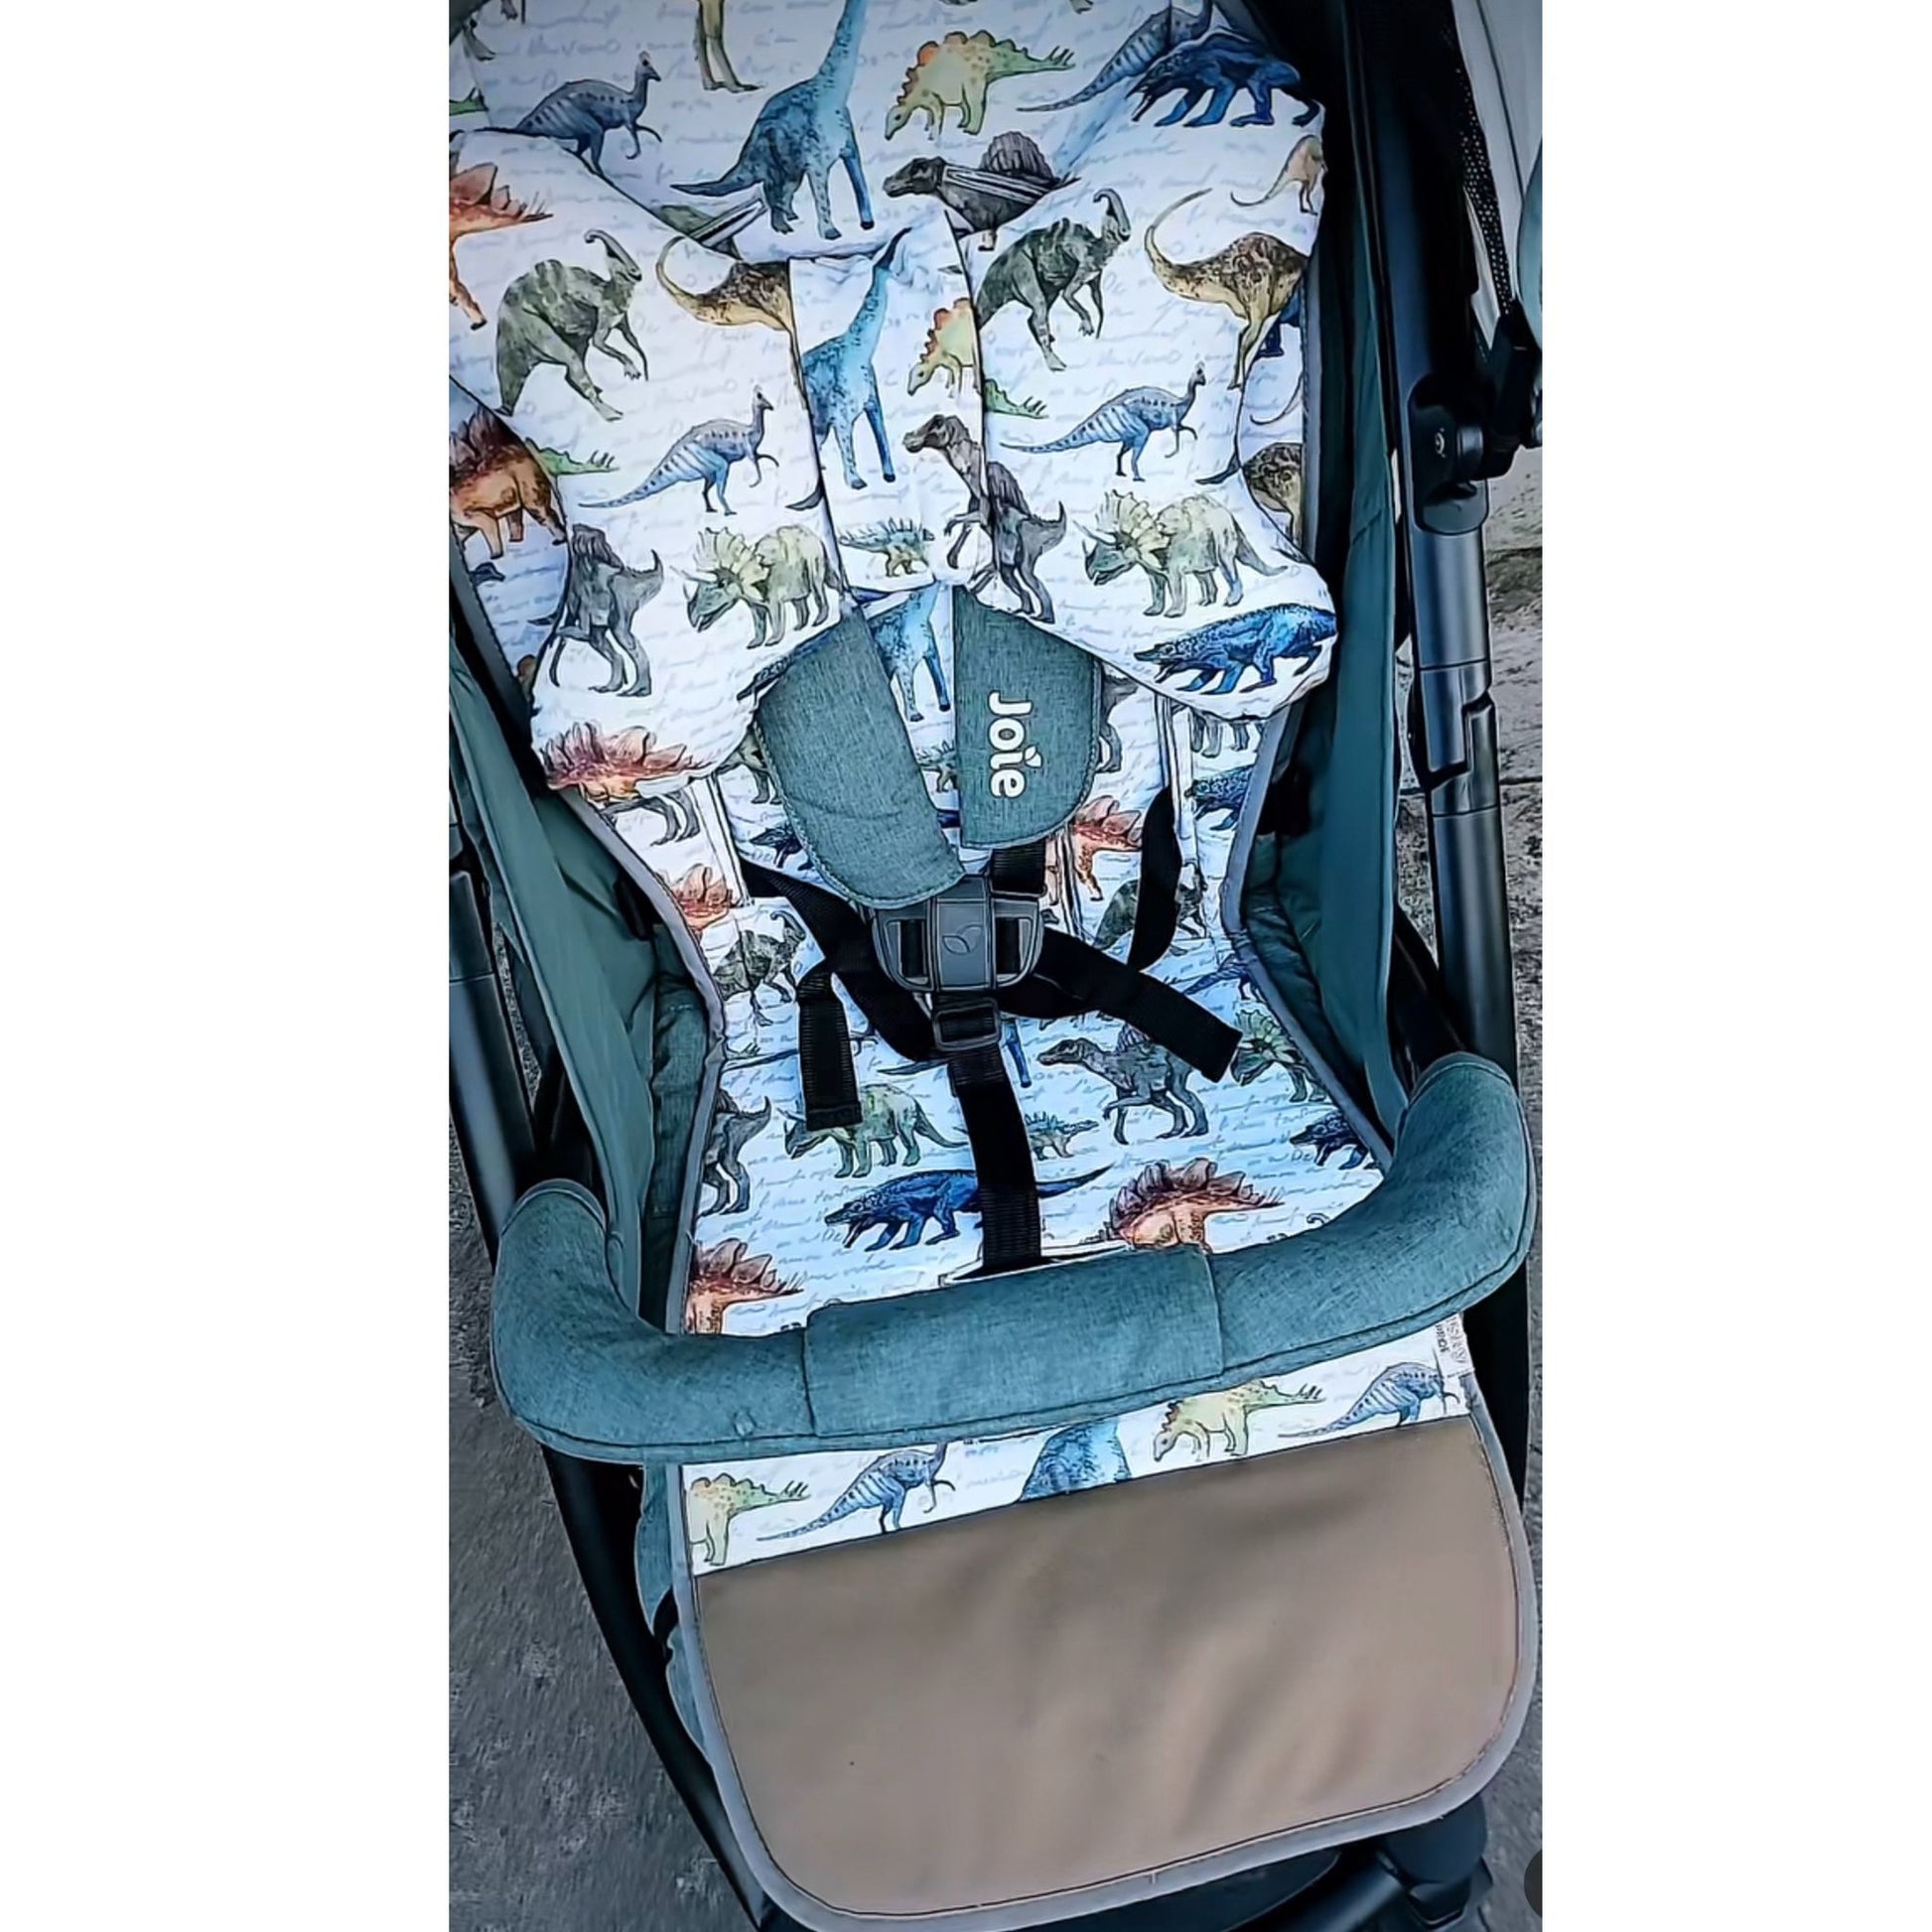 evcushy stroller accessories liner and head support pillow dinosaurs pattern